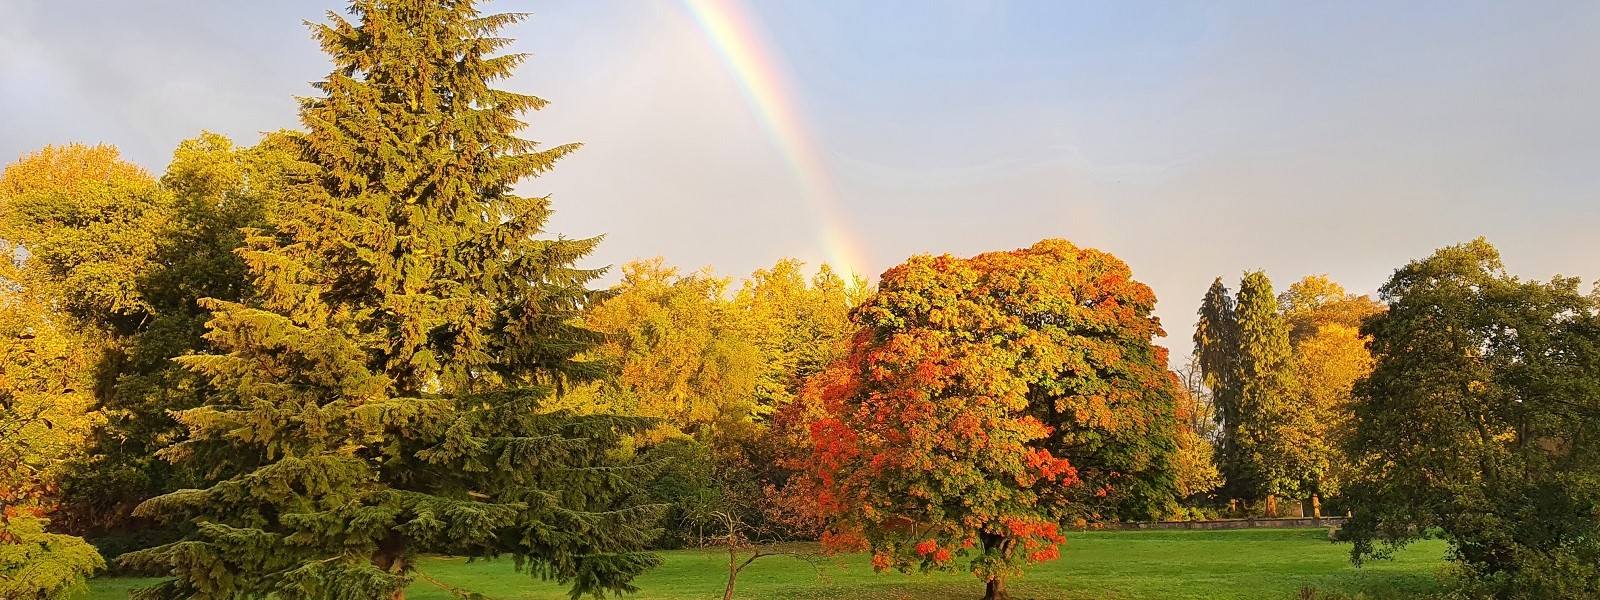 View of autumn trees with bright sky and rainbow